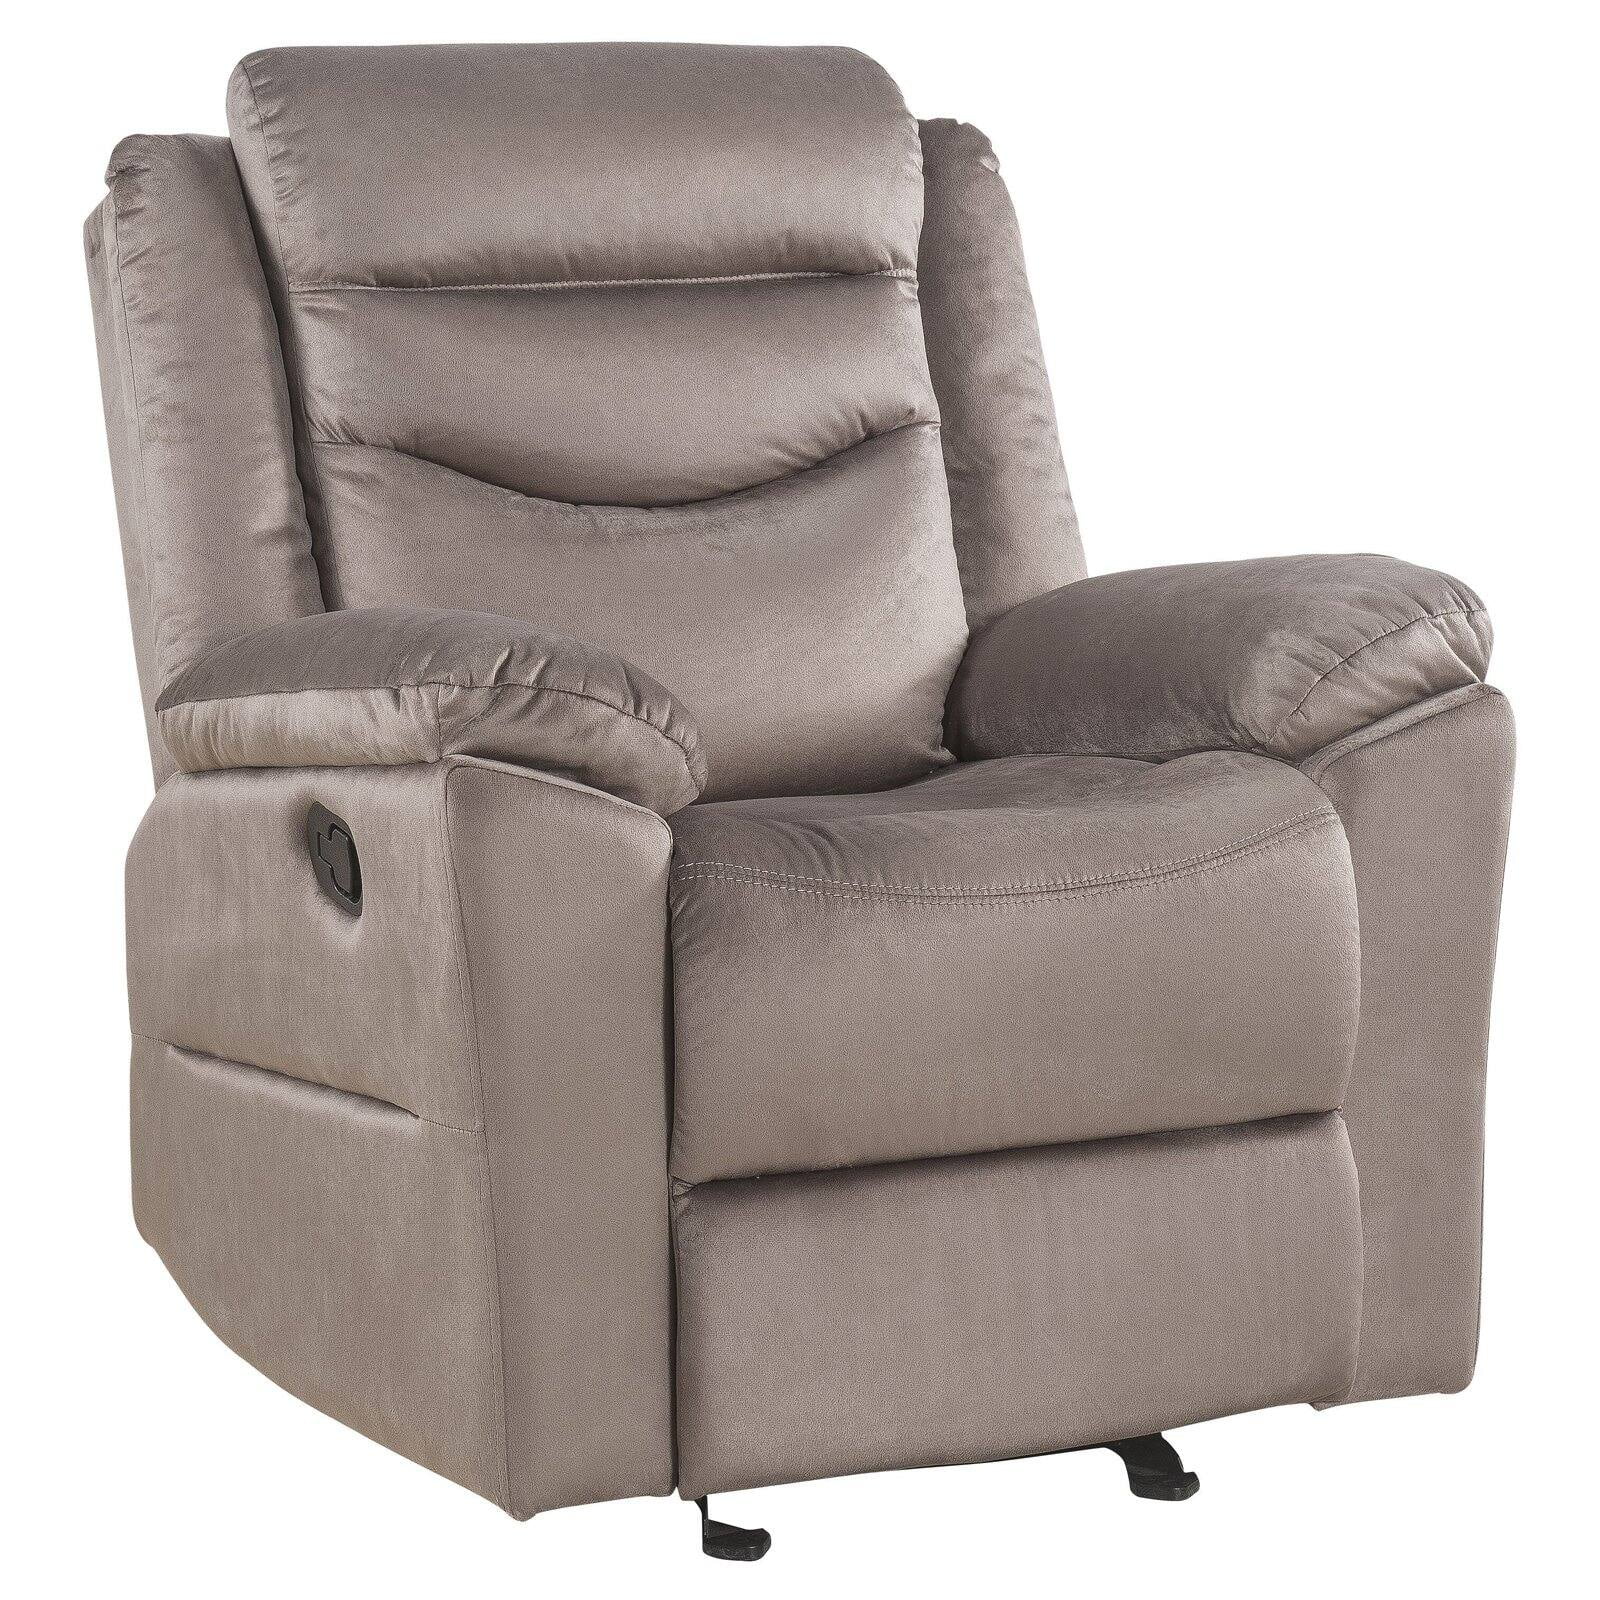 Picture of ACME 53667 Fiacre Glider Recliner - Velvet - 42 x 35 x 37 in.